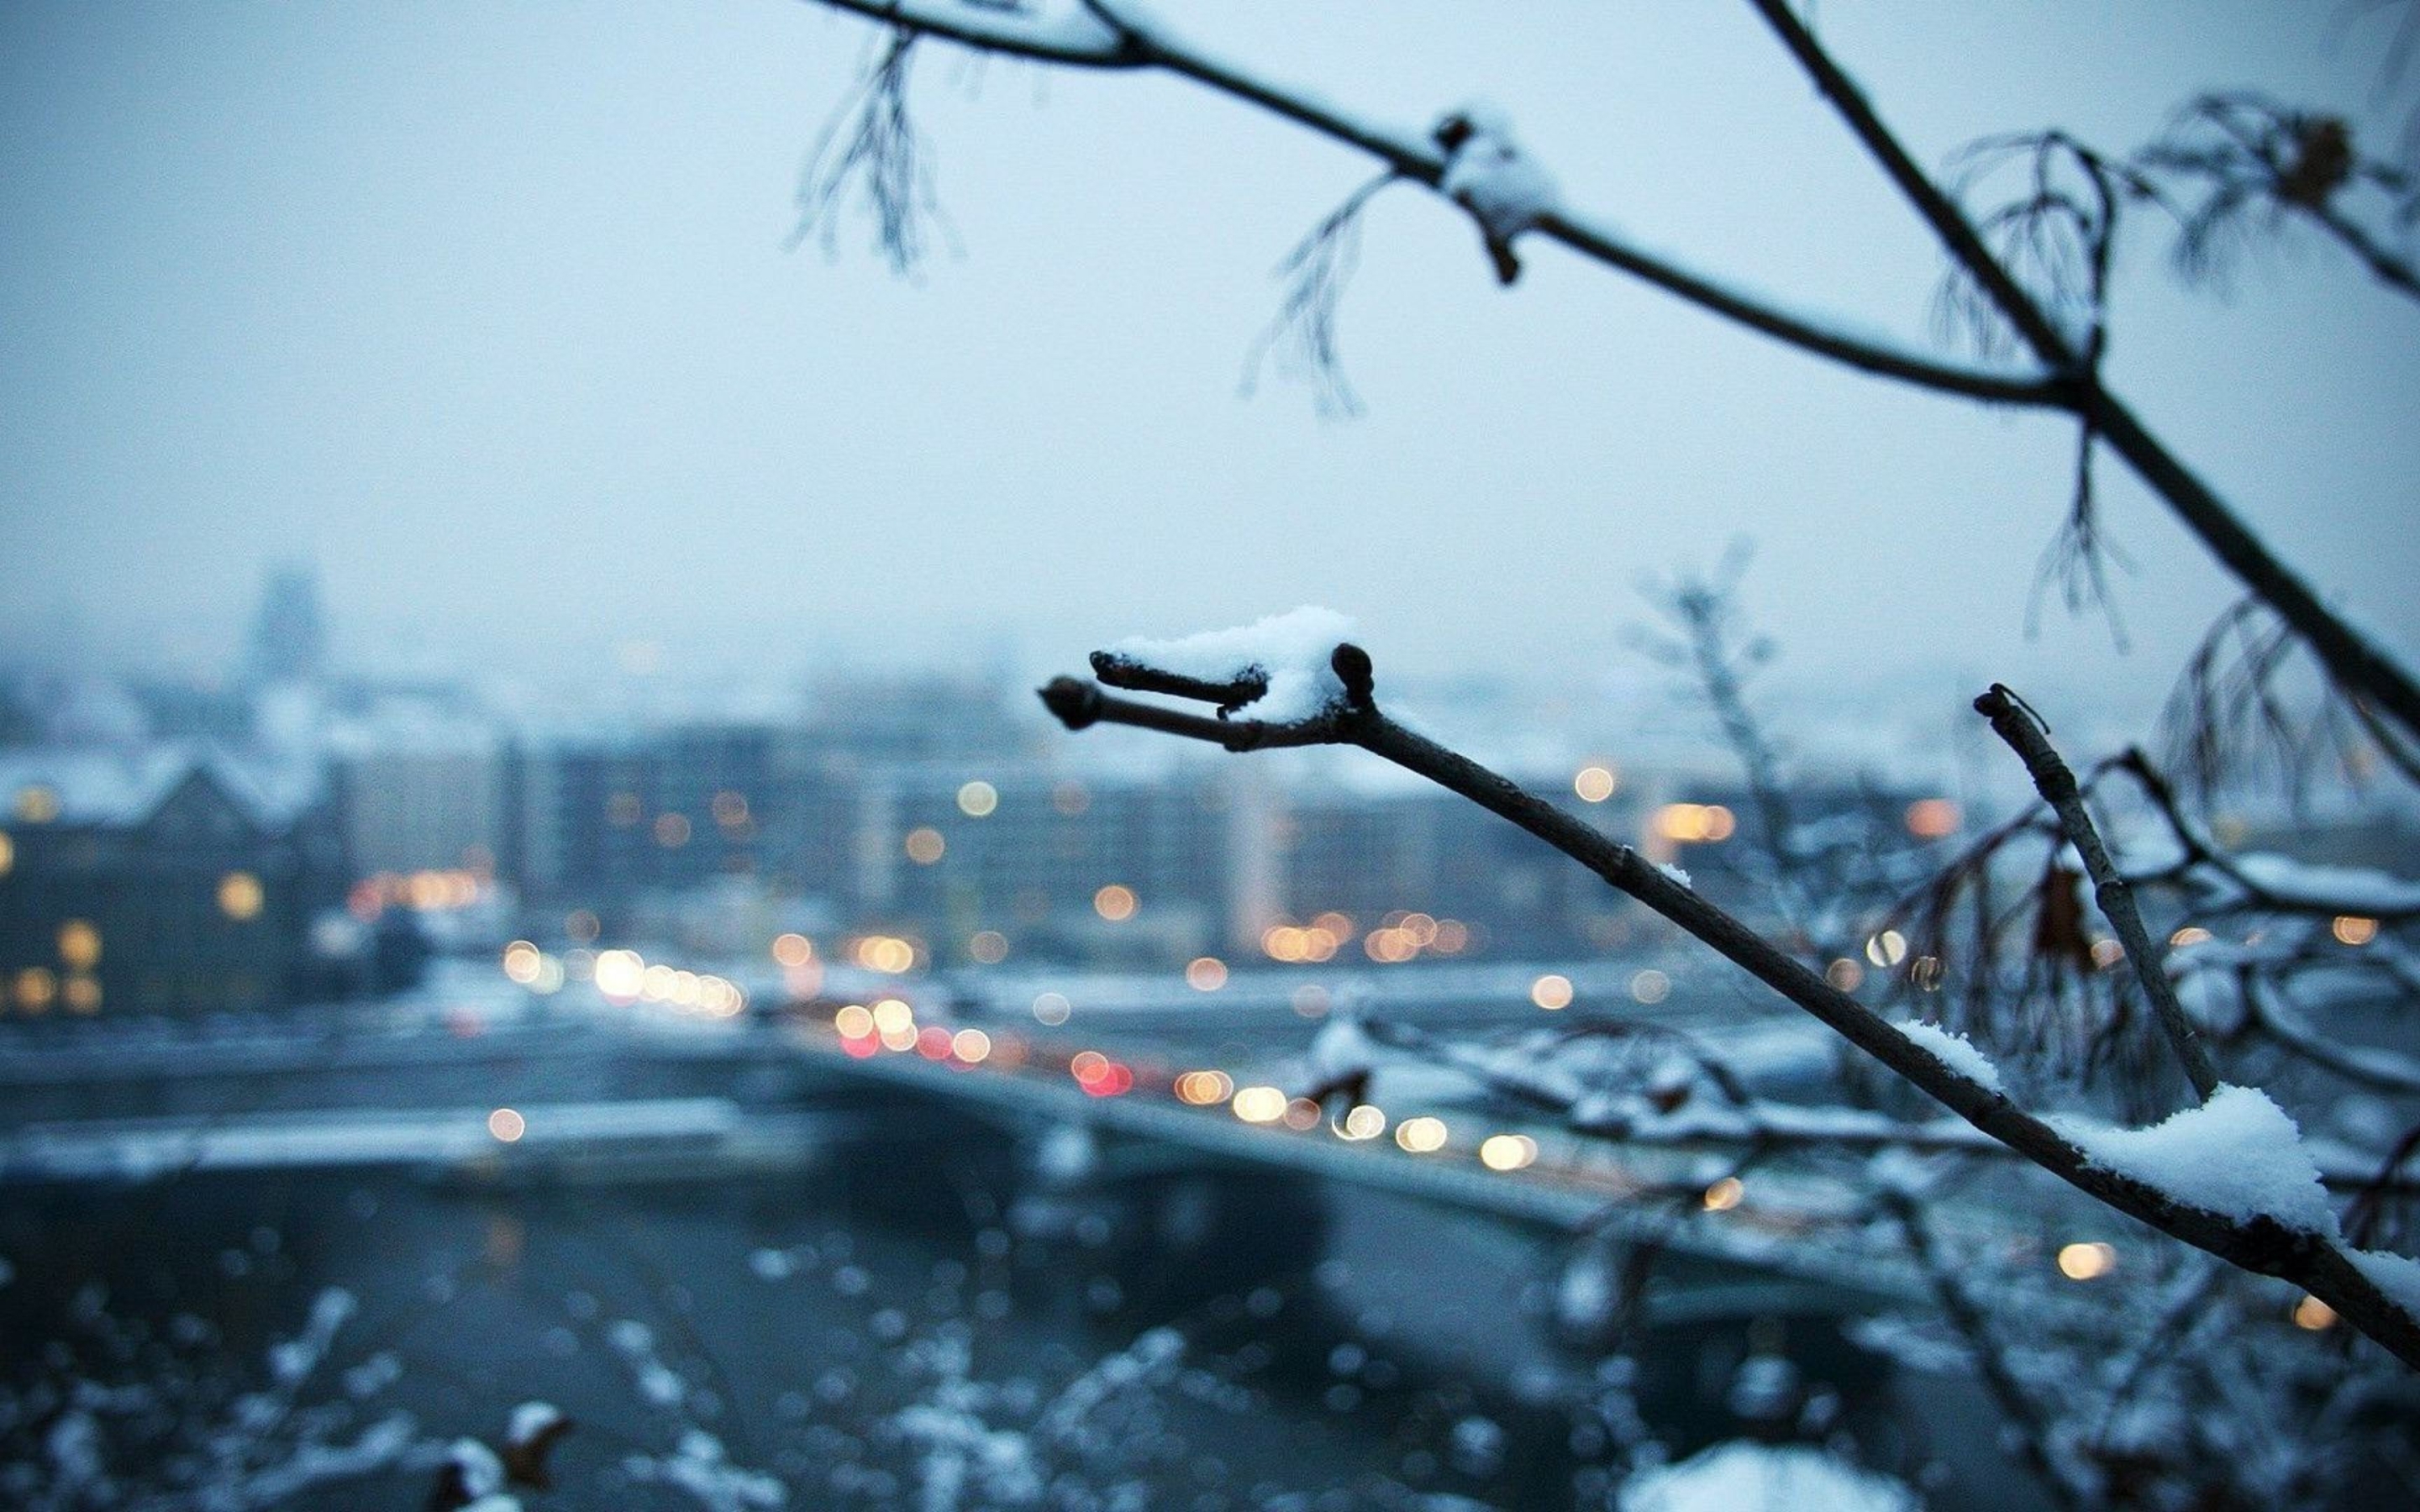 Snowy Branch With The City In The Background Mac Wallpaper ...